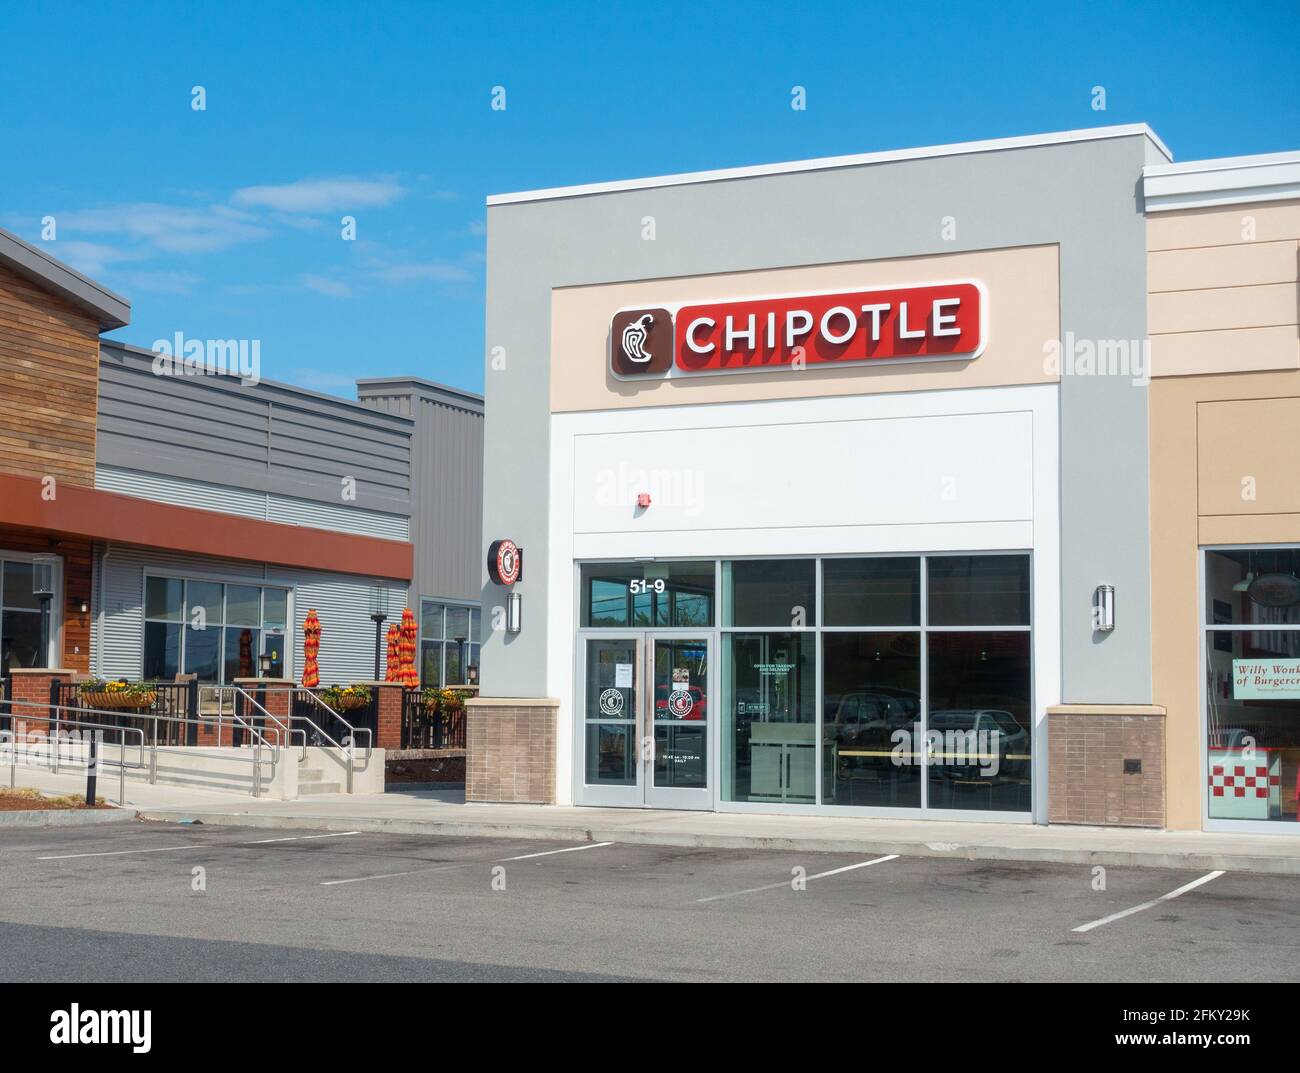 Chipotle Restaurant Storefront in Shopping Area, Plymouth, Massachusetts USA Stock Photo